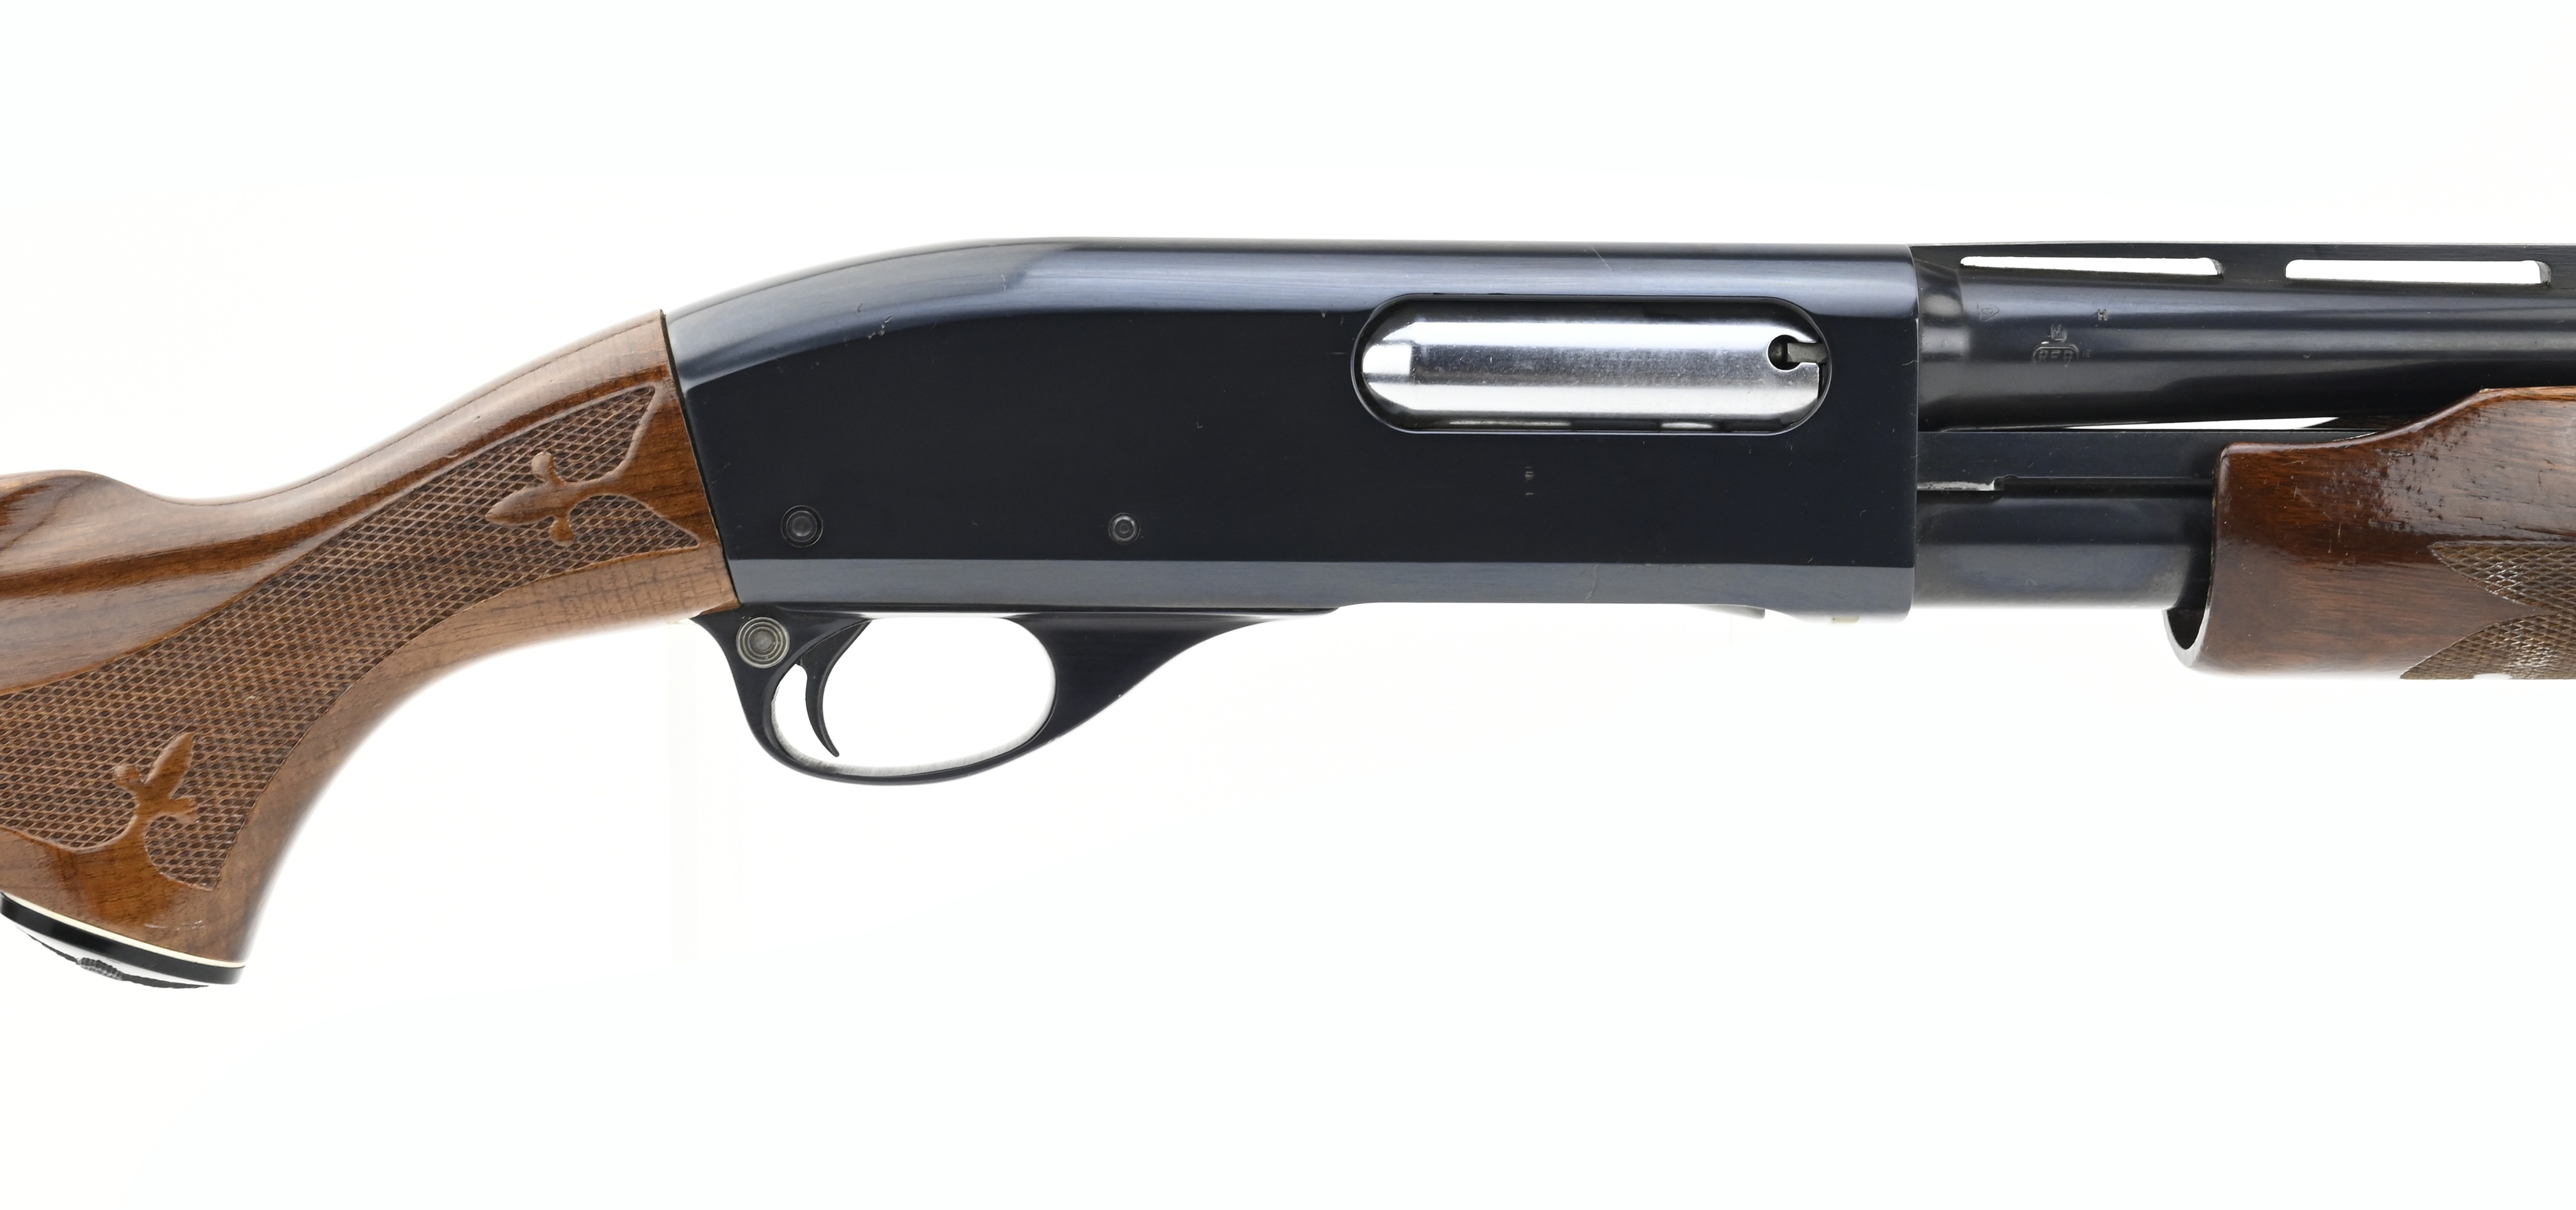 Remington 870 Wingmaster Price - How do you Price a Switches?